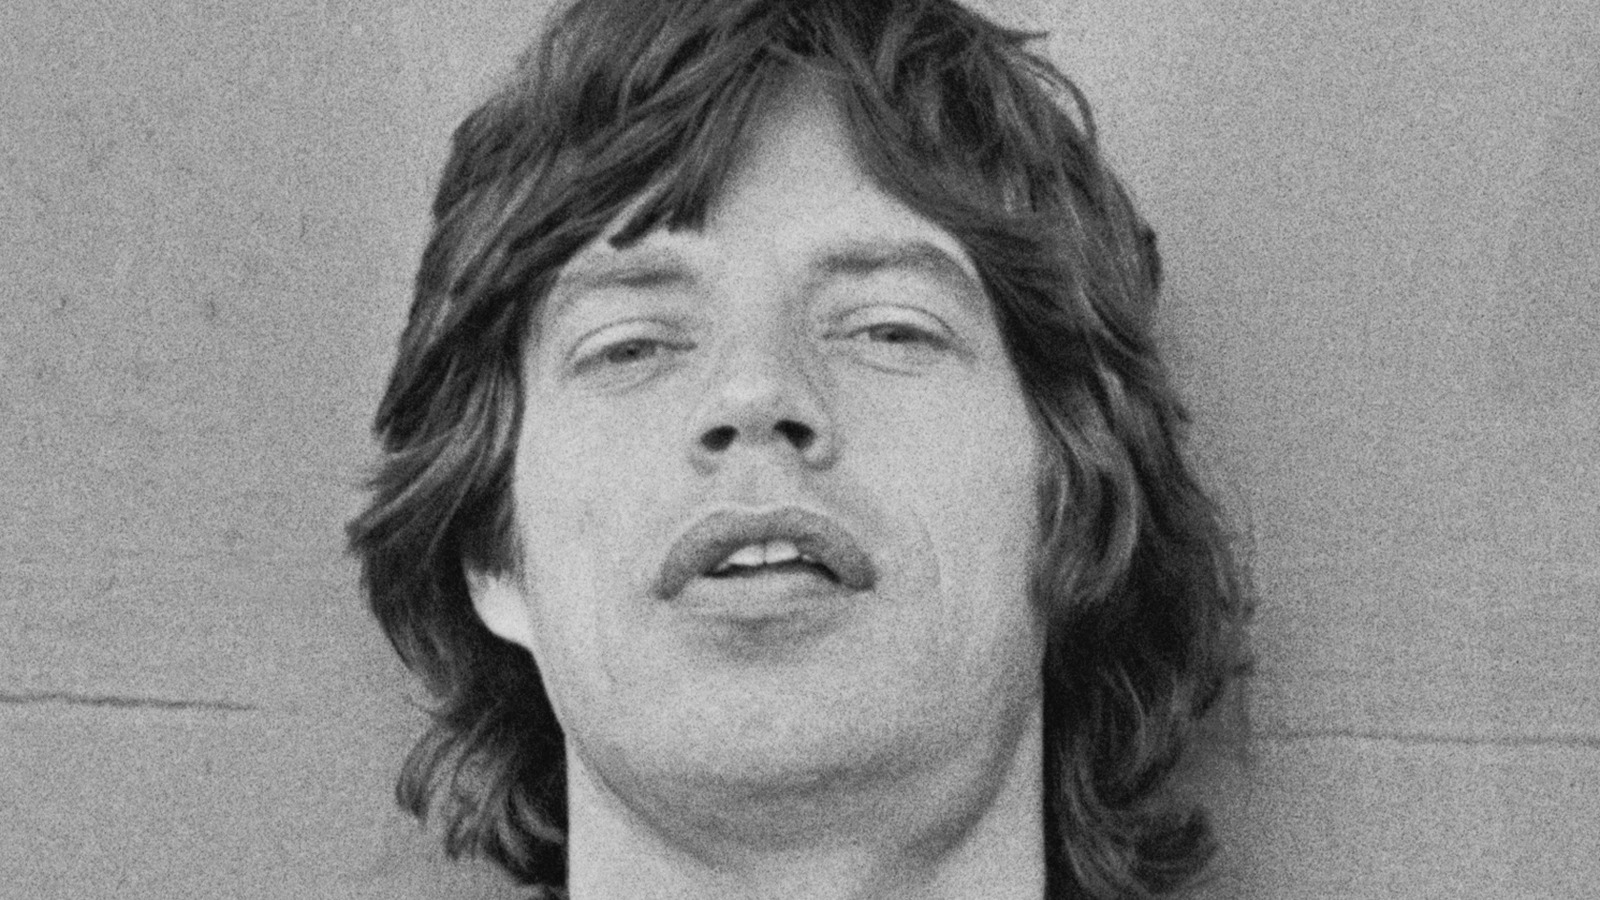 Mick jagger, lead singer of the rolling stones. 